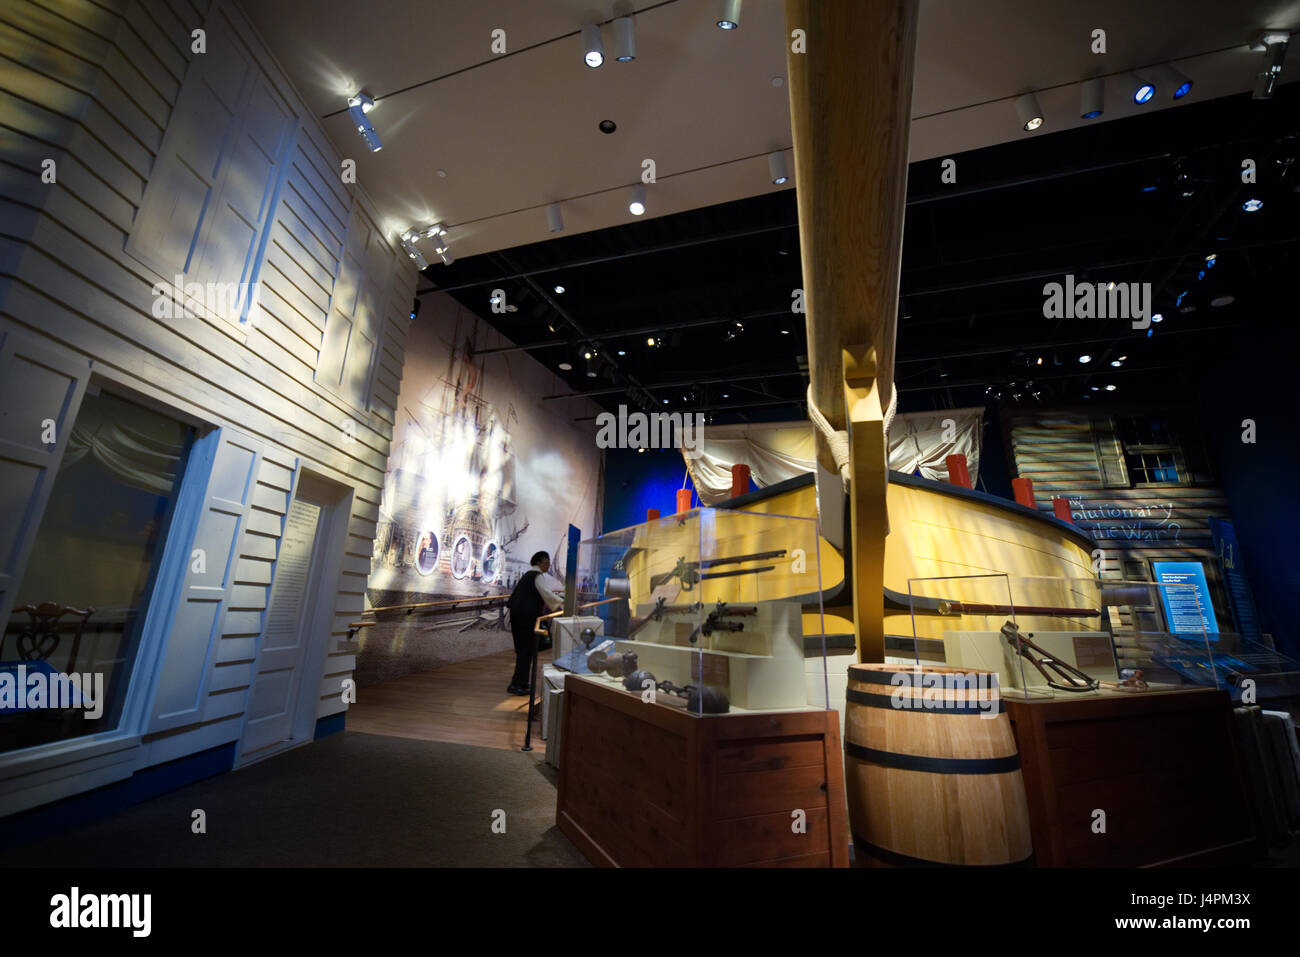 Replica of a privateer ship is part of the exhibit at the Museum of the American Revolution in Philadelphia, PA. Stock Photo